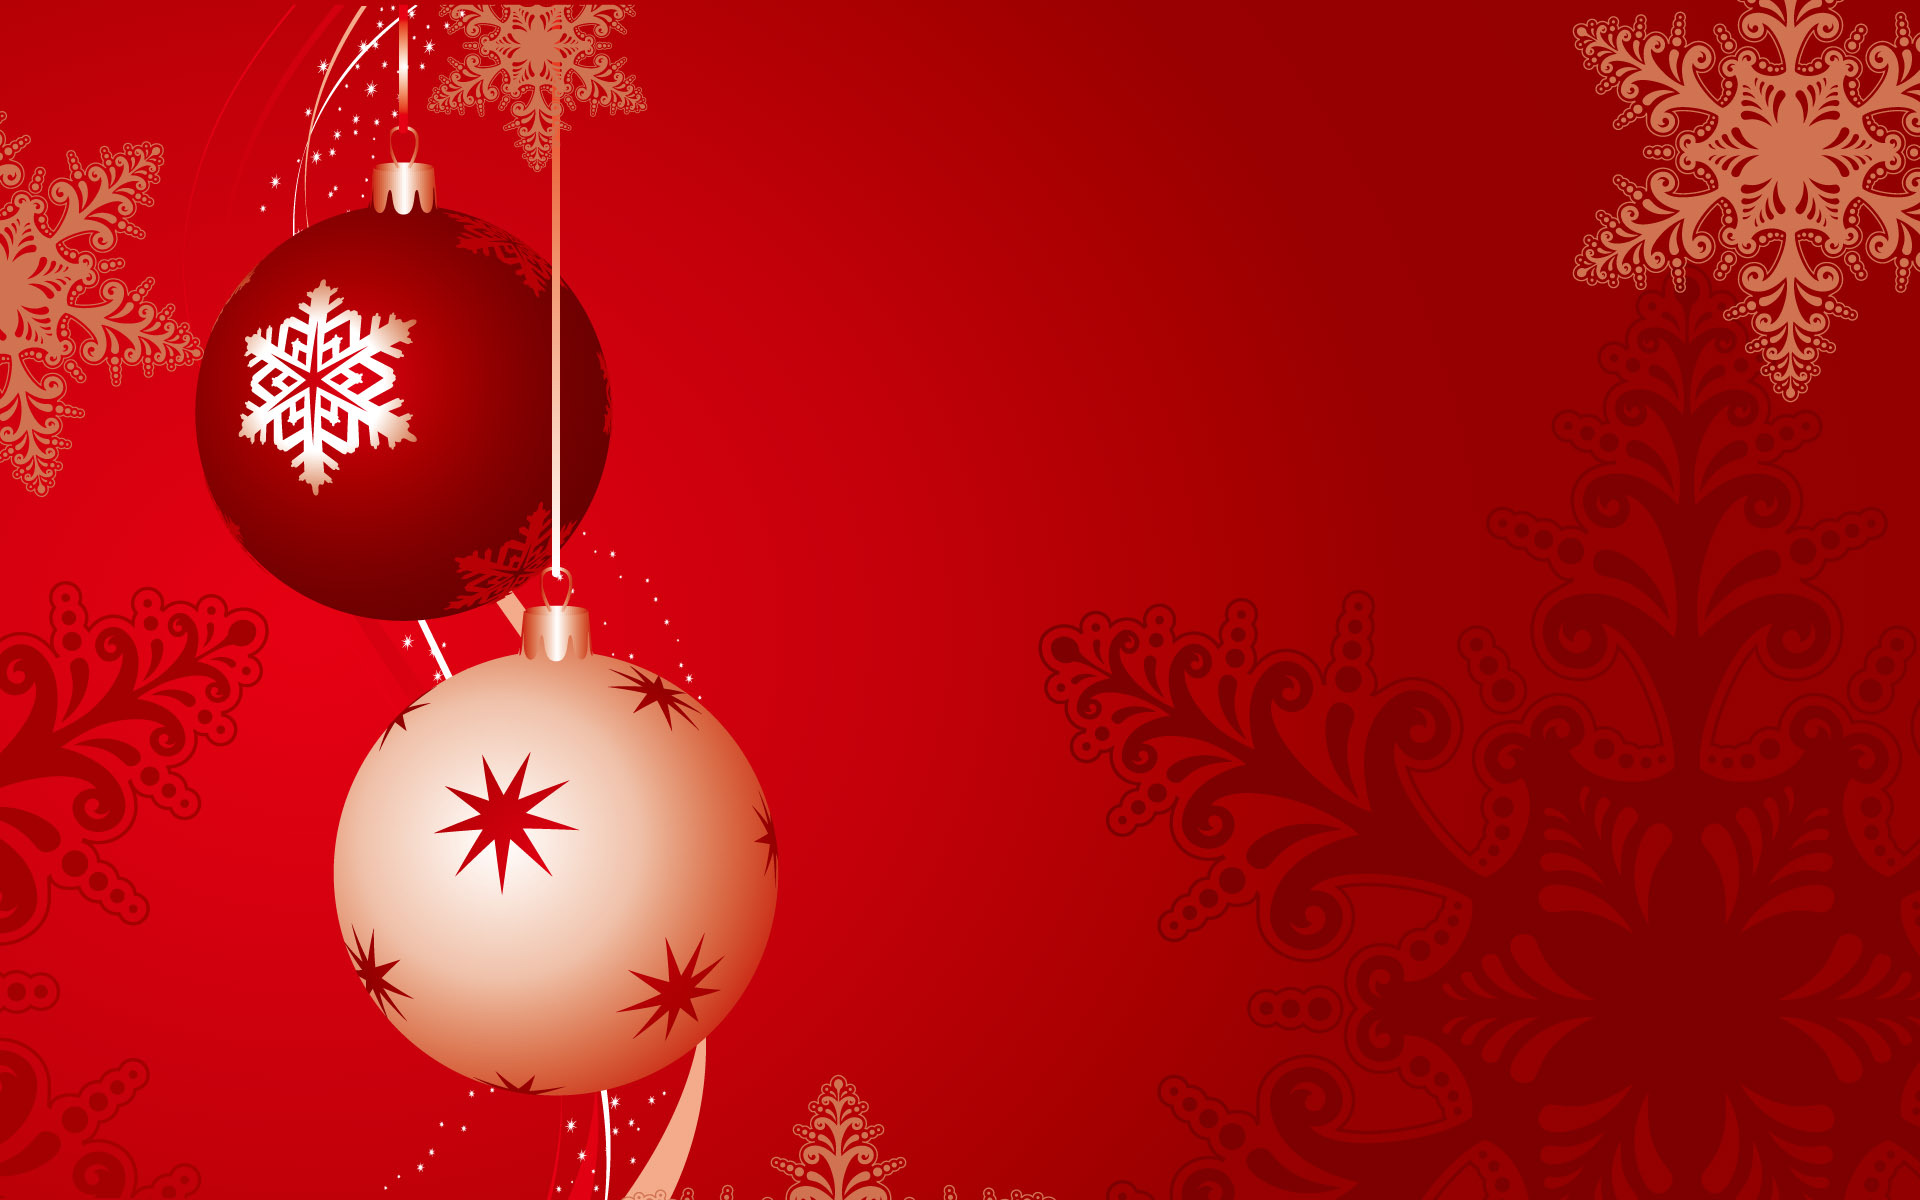 Festive Decorations On Christmas Wallpaper And Image